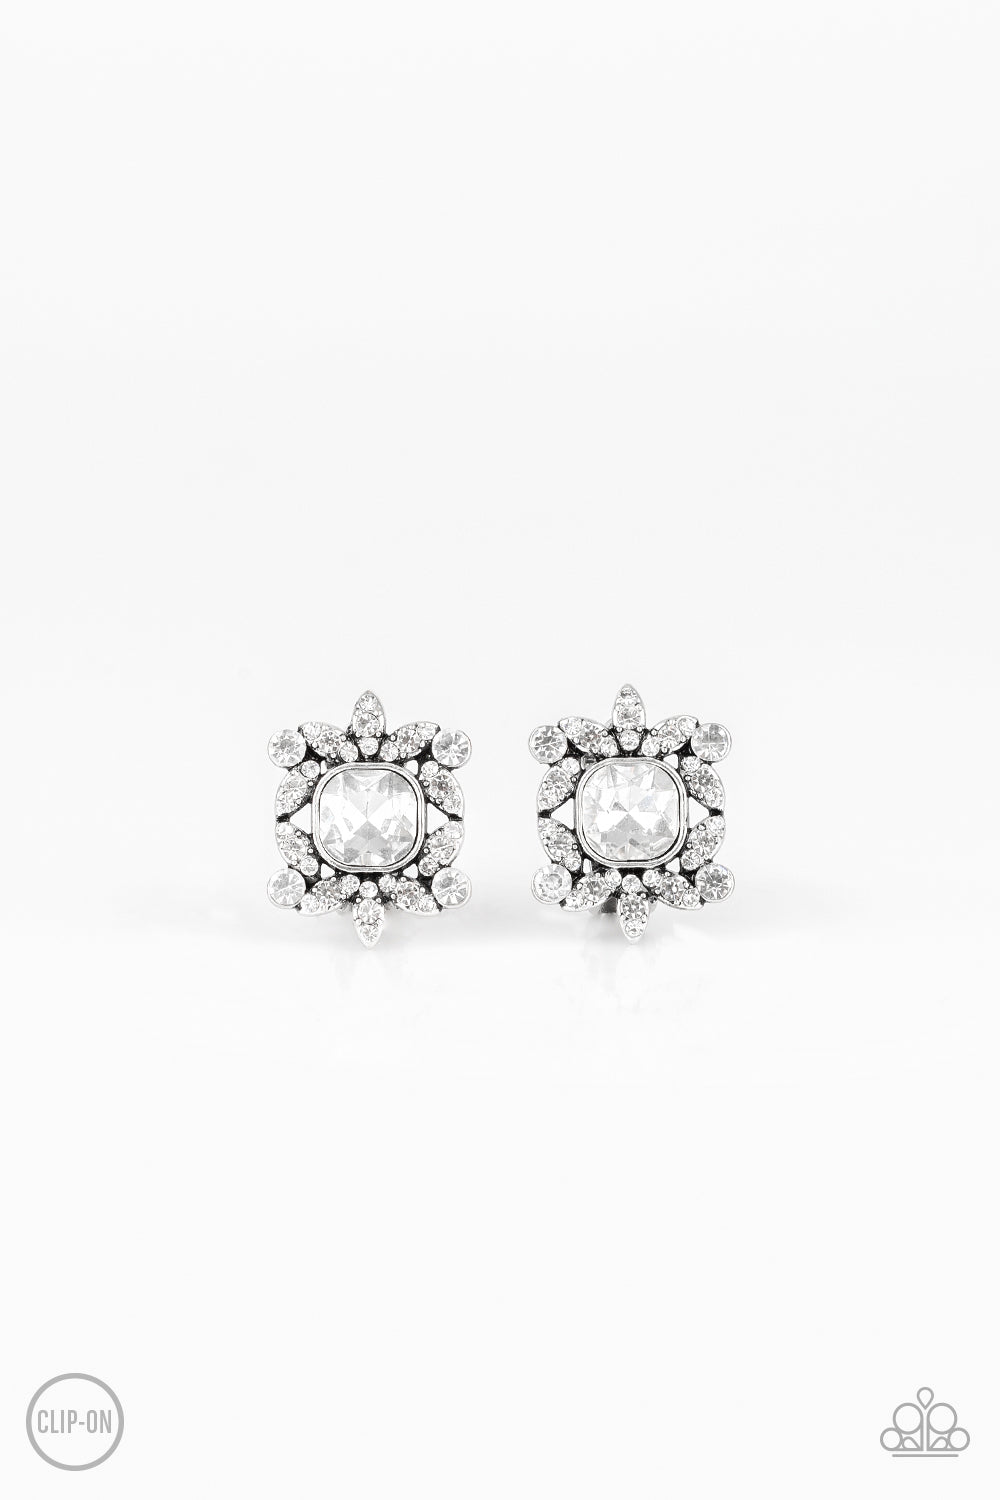 First Rate Famous - white - Paparazzi CLIP ON earrings